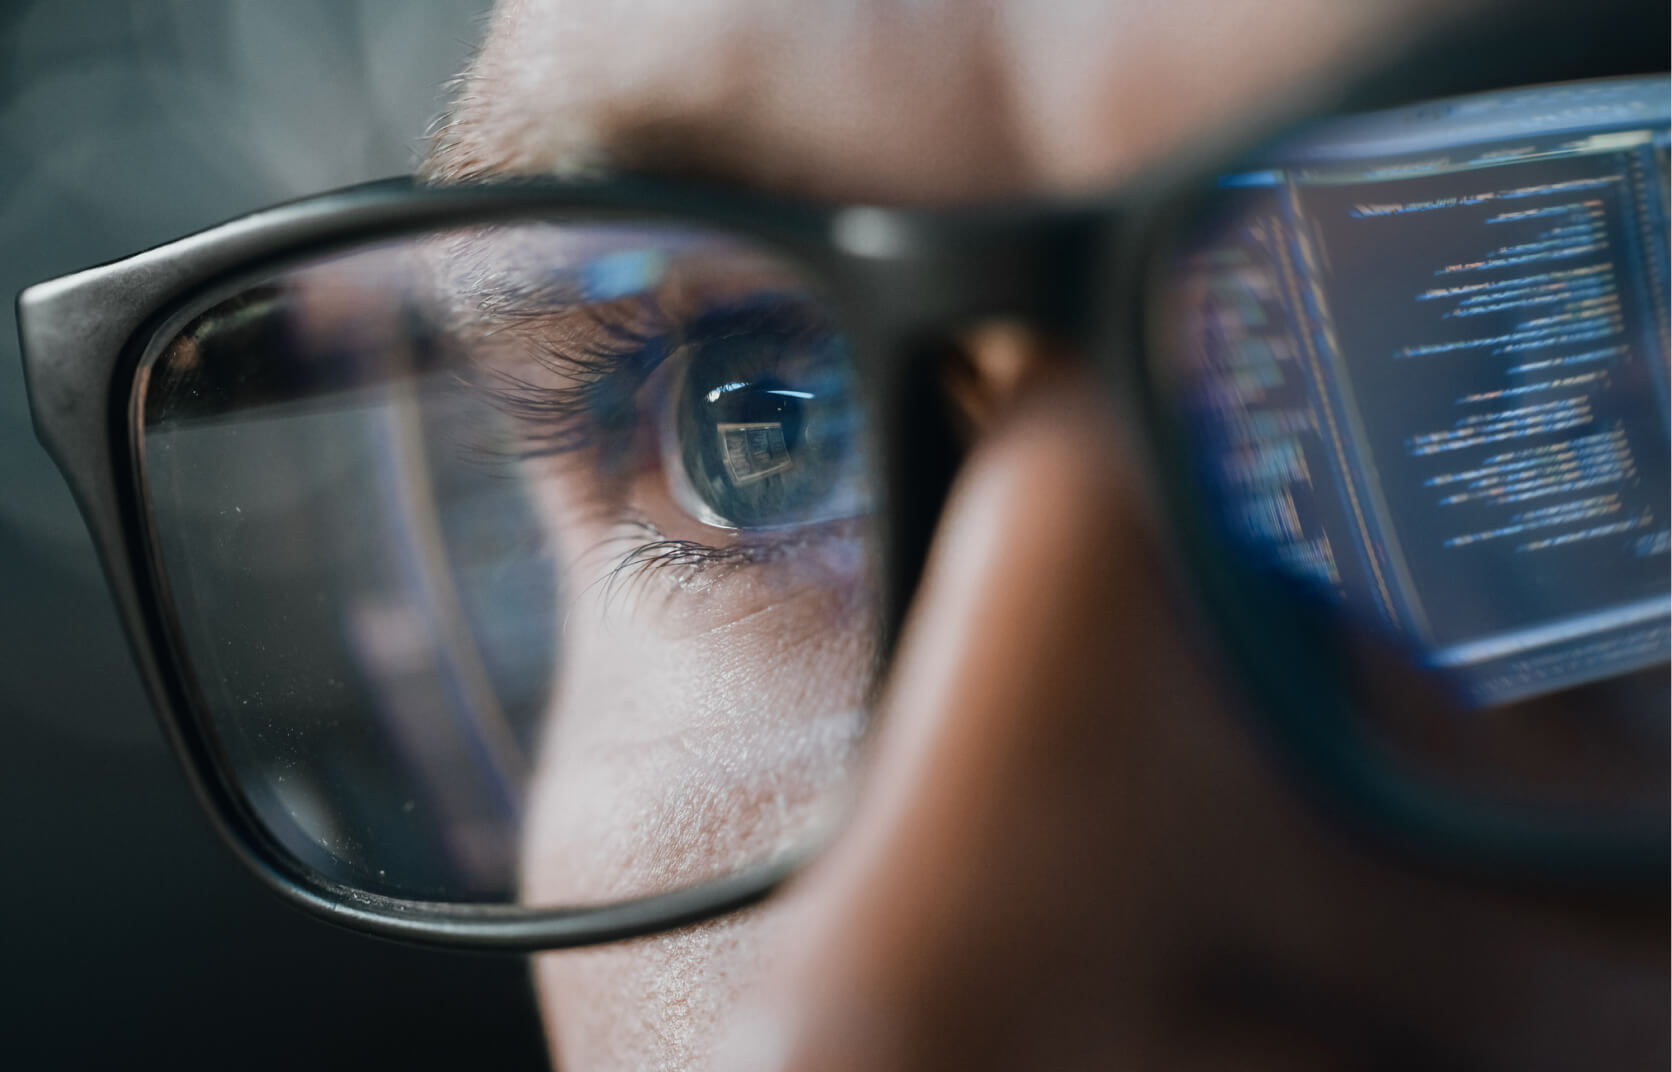 Close-up portrait of a cybersecurity professional working on a computer with lines of code reflecting his glasses